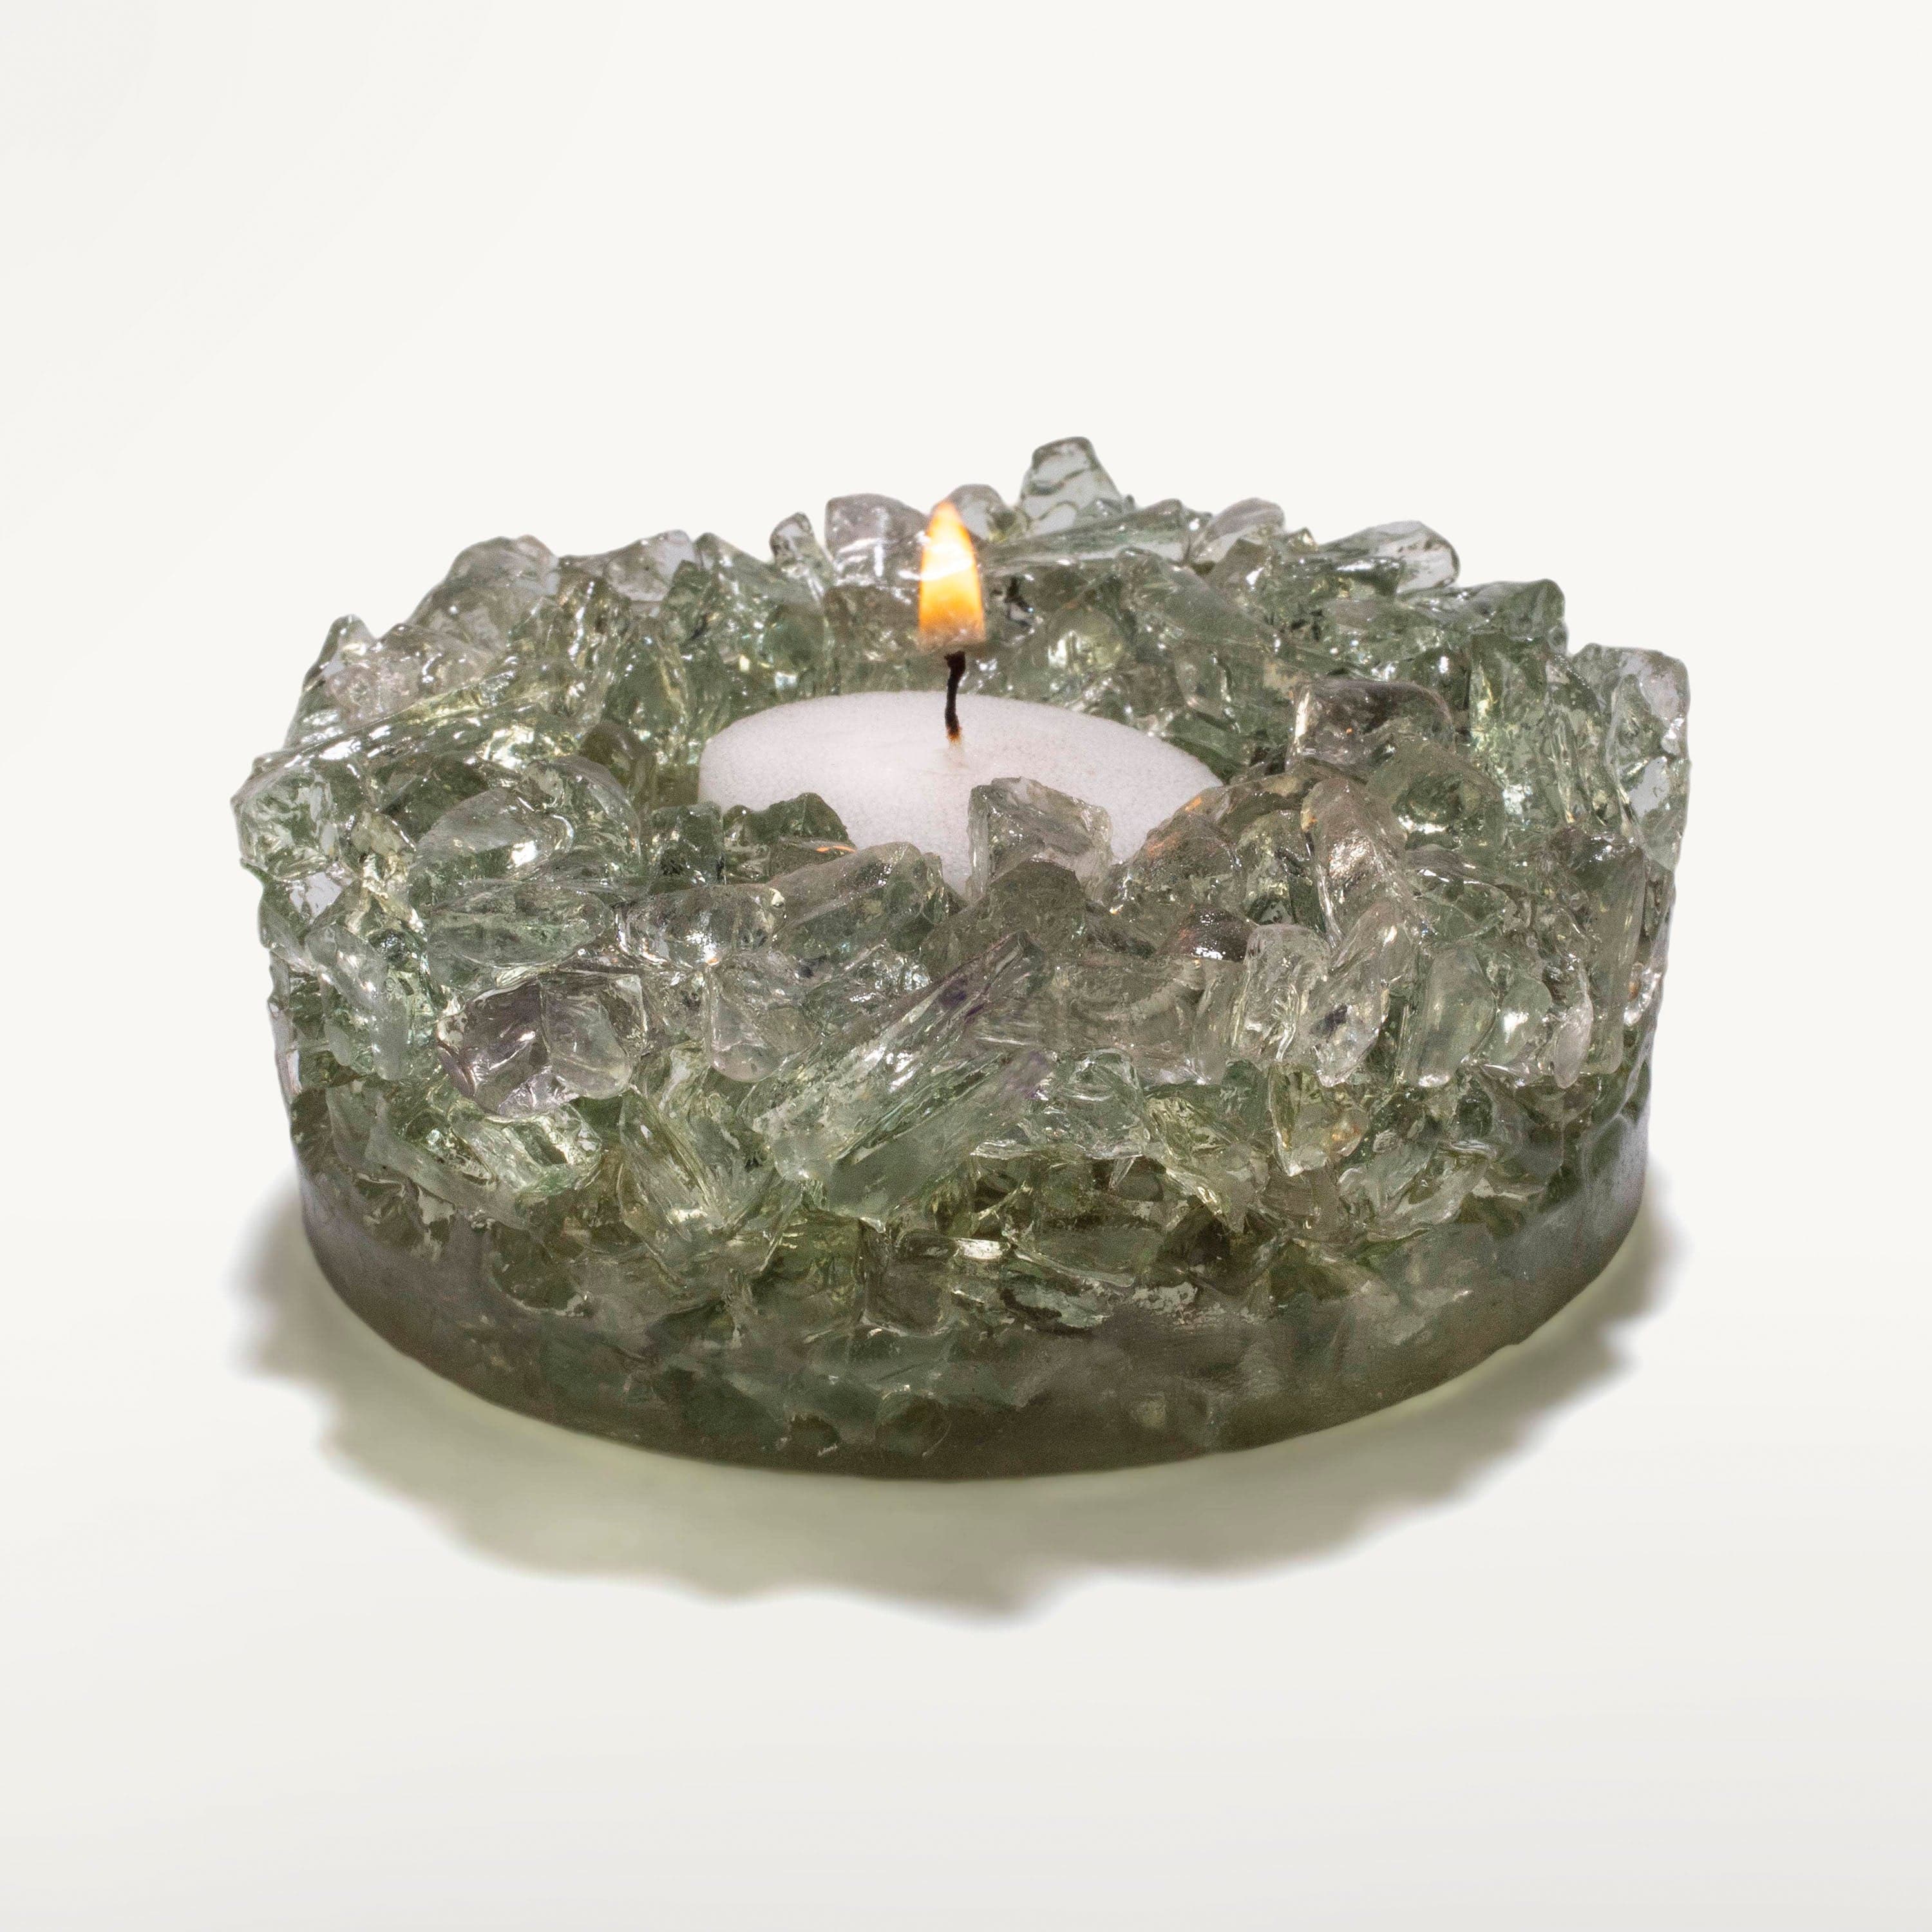 Kalifano Candle Holders Crushed Green Quartz Tealight Candle Holder GCH-19